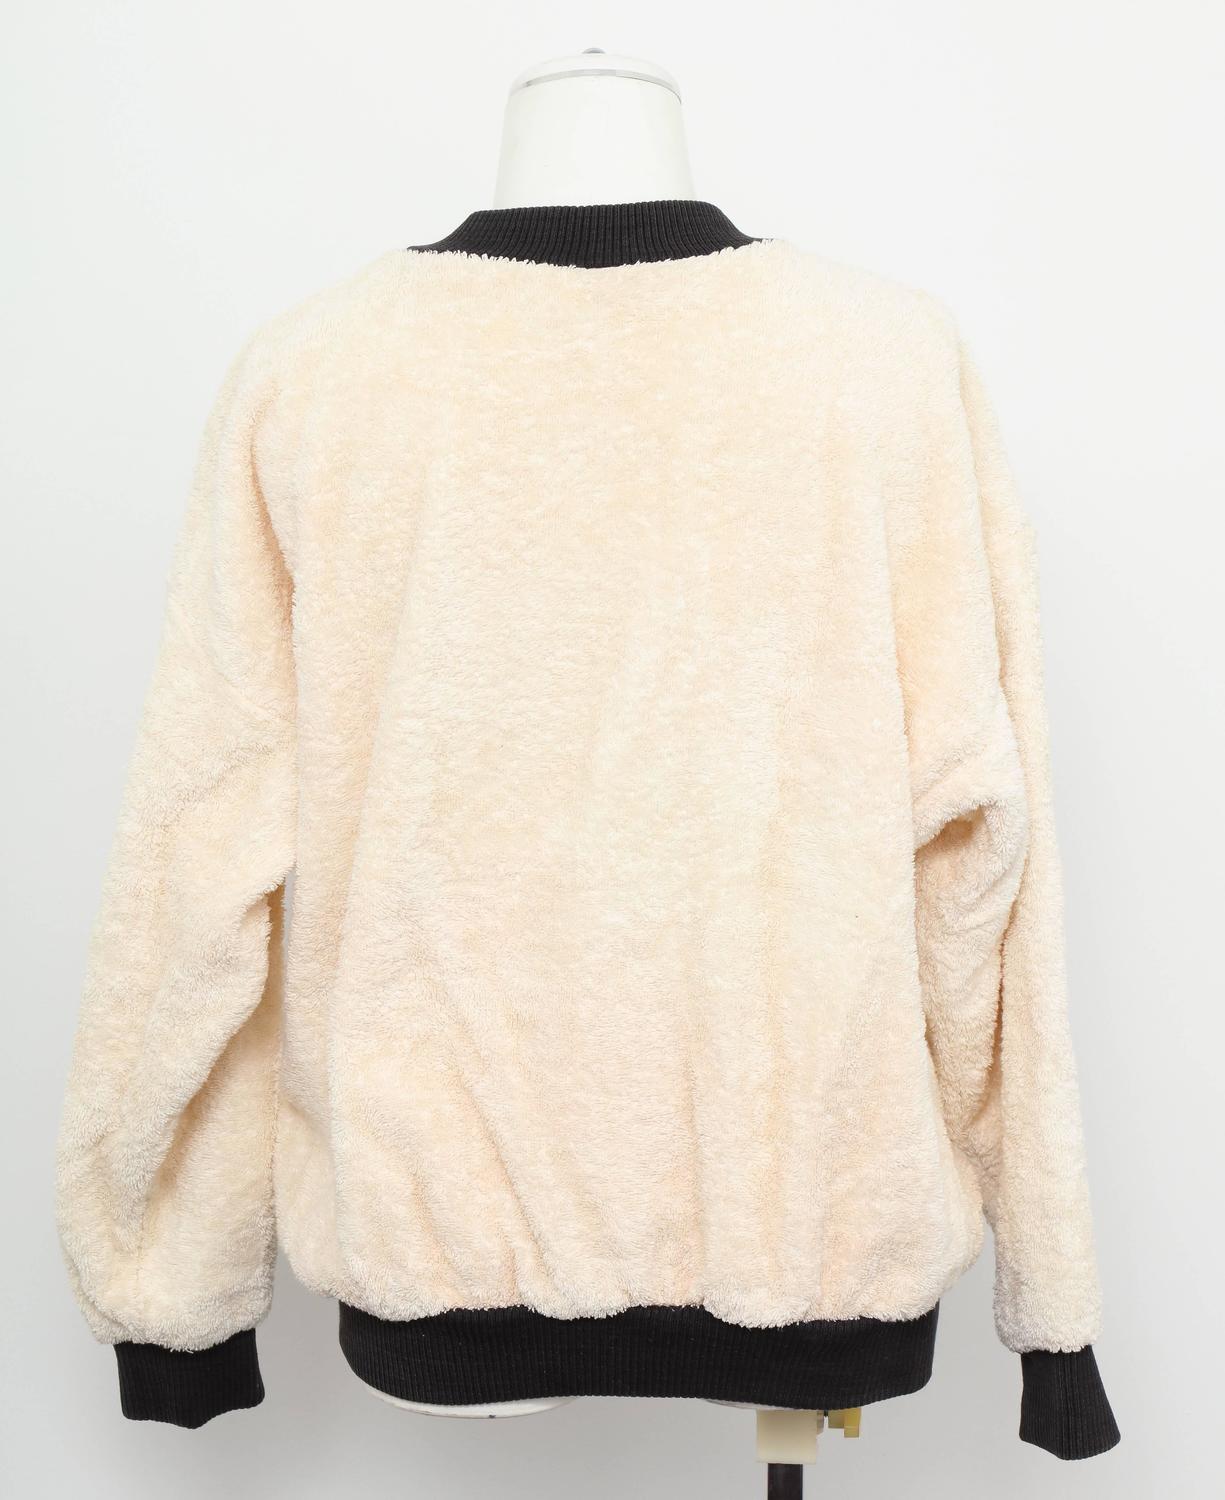 Vintage Chanel Sweat Shirt Sweater with Iconic CC For Sale at 1stdibs